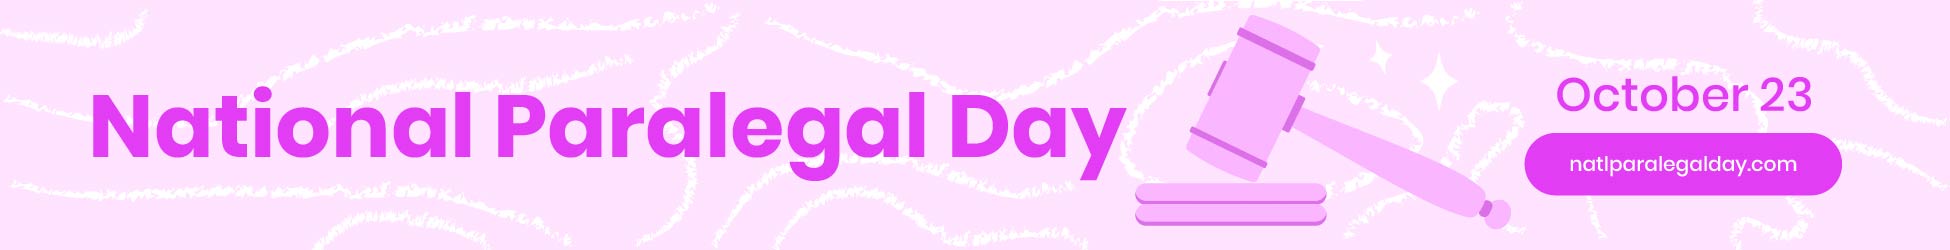 National Paralegal Day Website Banner